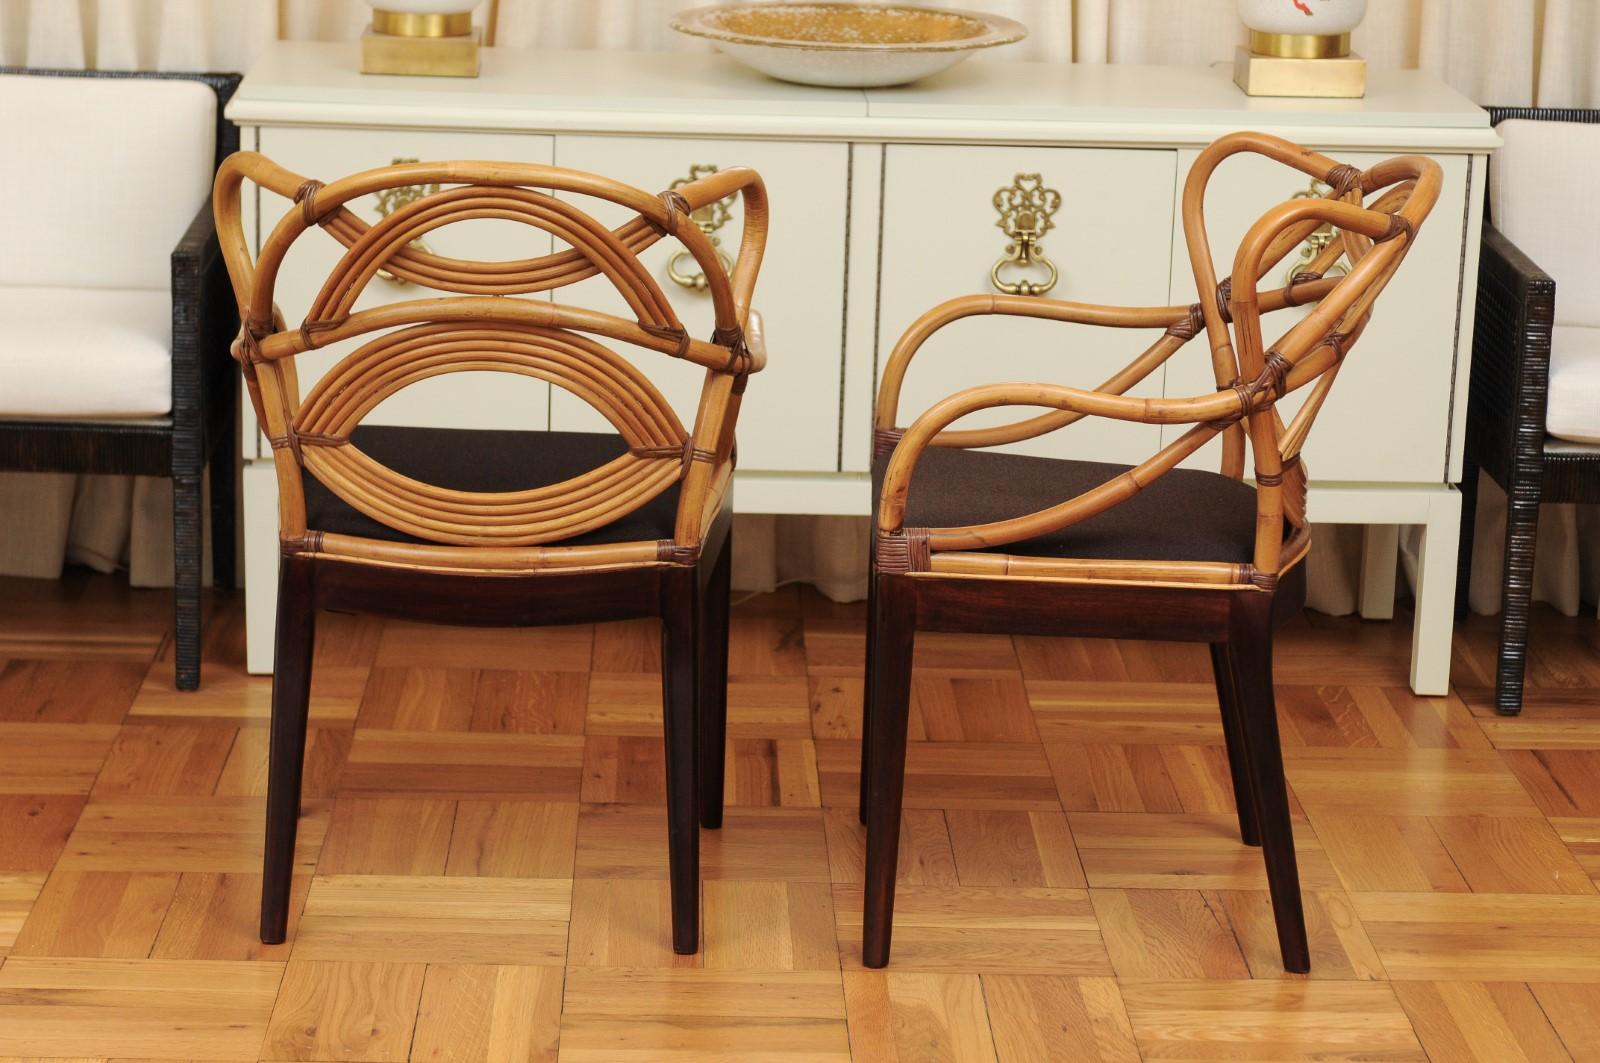 Staggering Set of 8 Sculptural Scalloped Back Rattan Dining Chairs, circa 1995 4